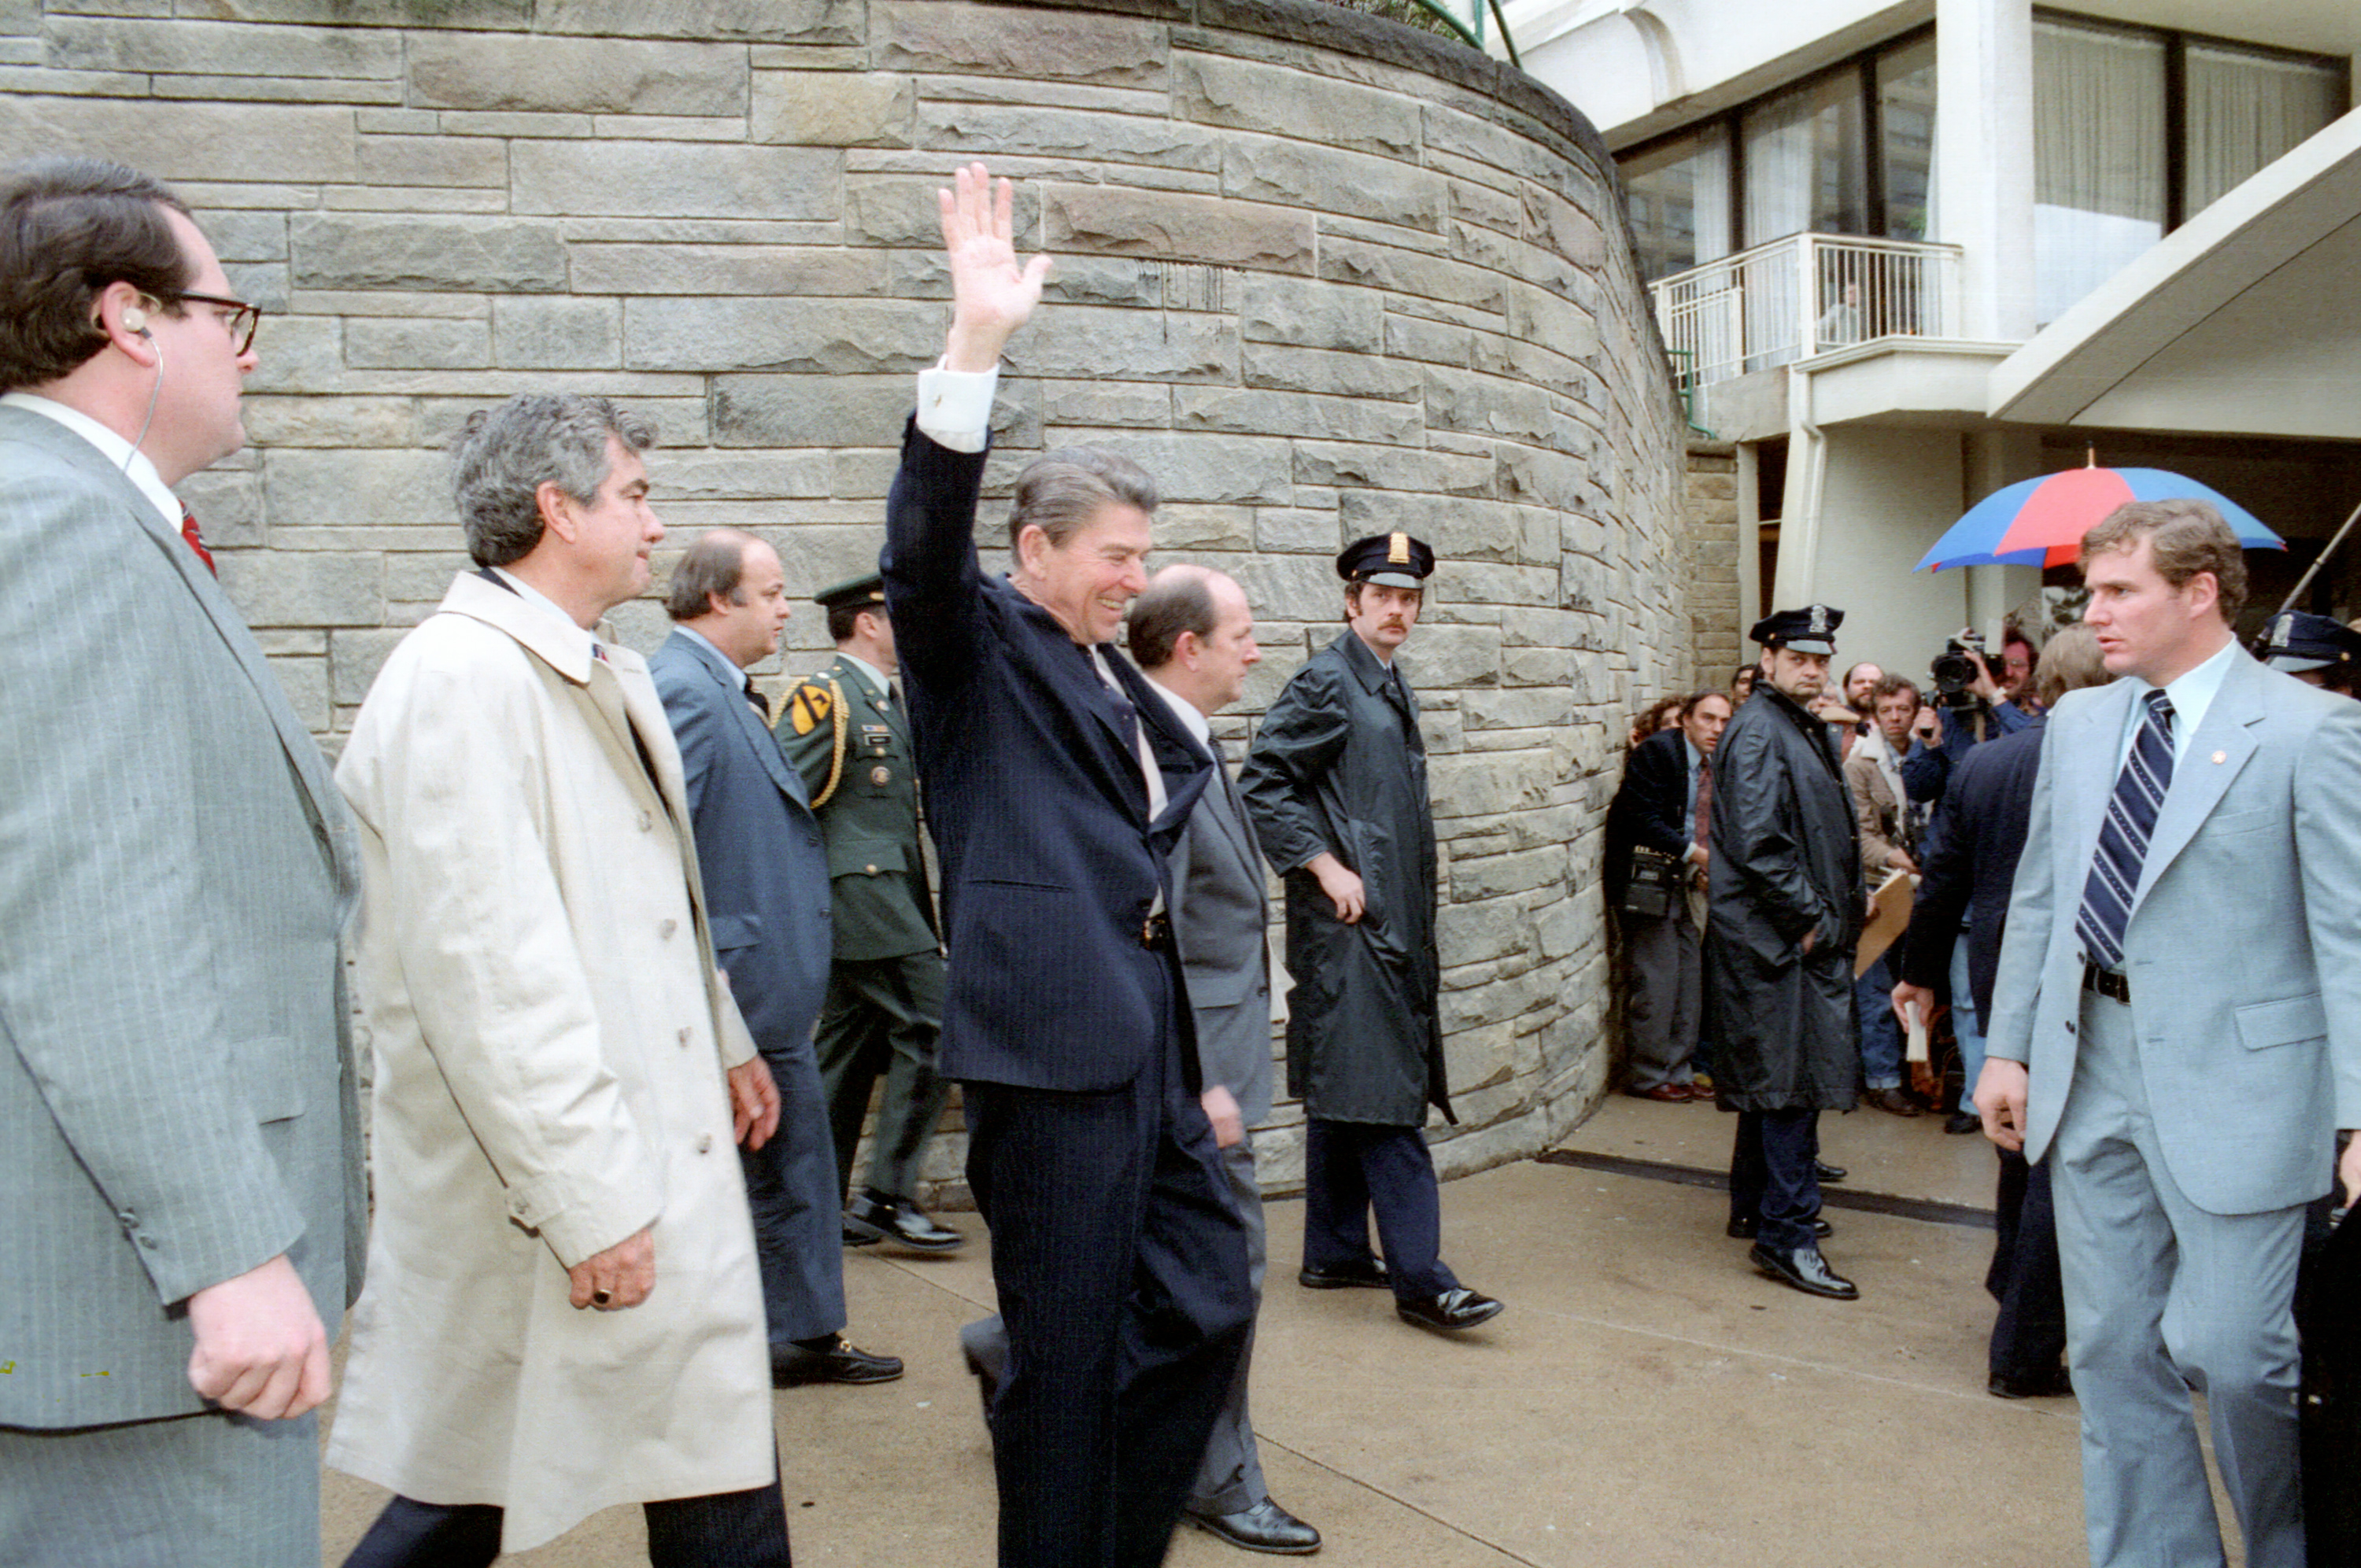 President Ronald Reagan, moments before shots were fired in an attempted assassination on March 30, 1981.